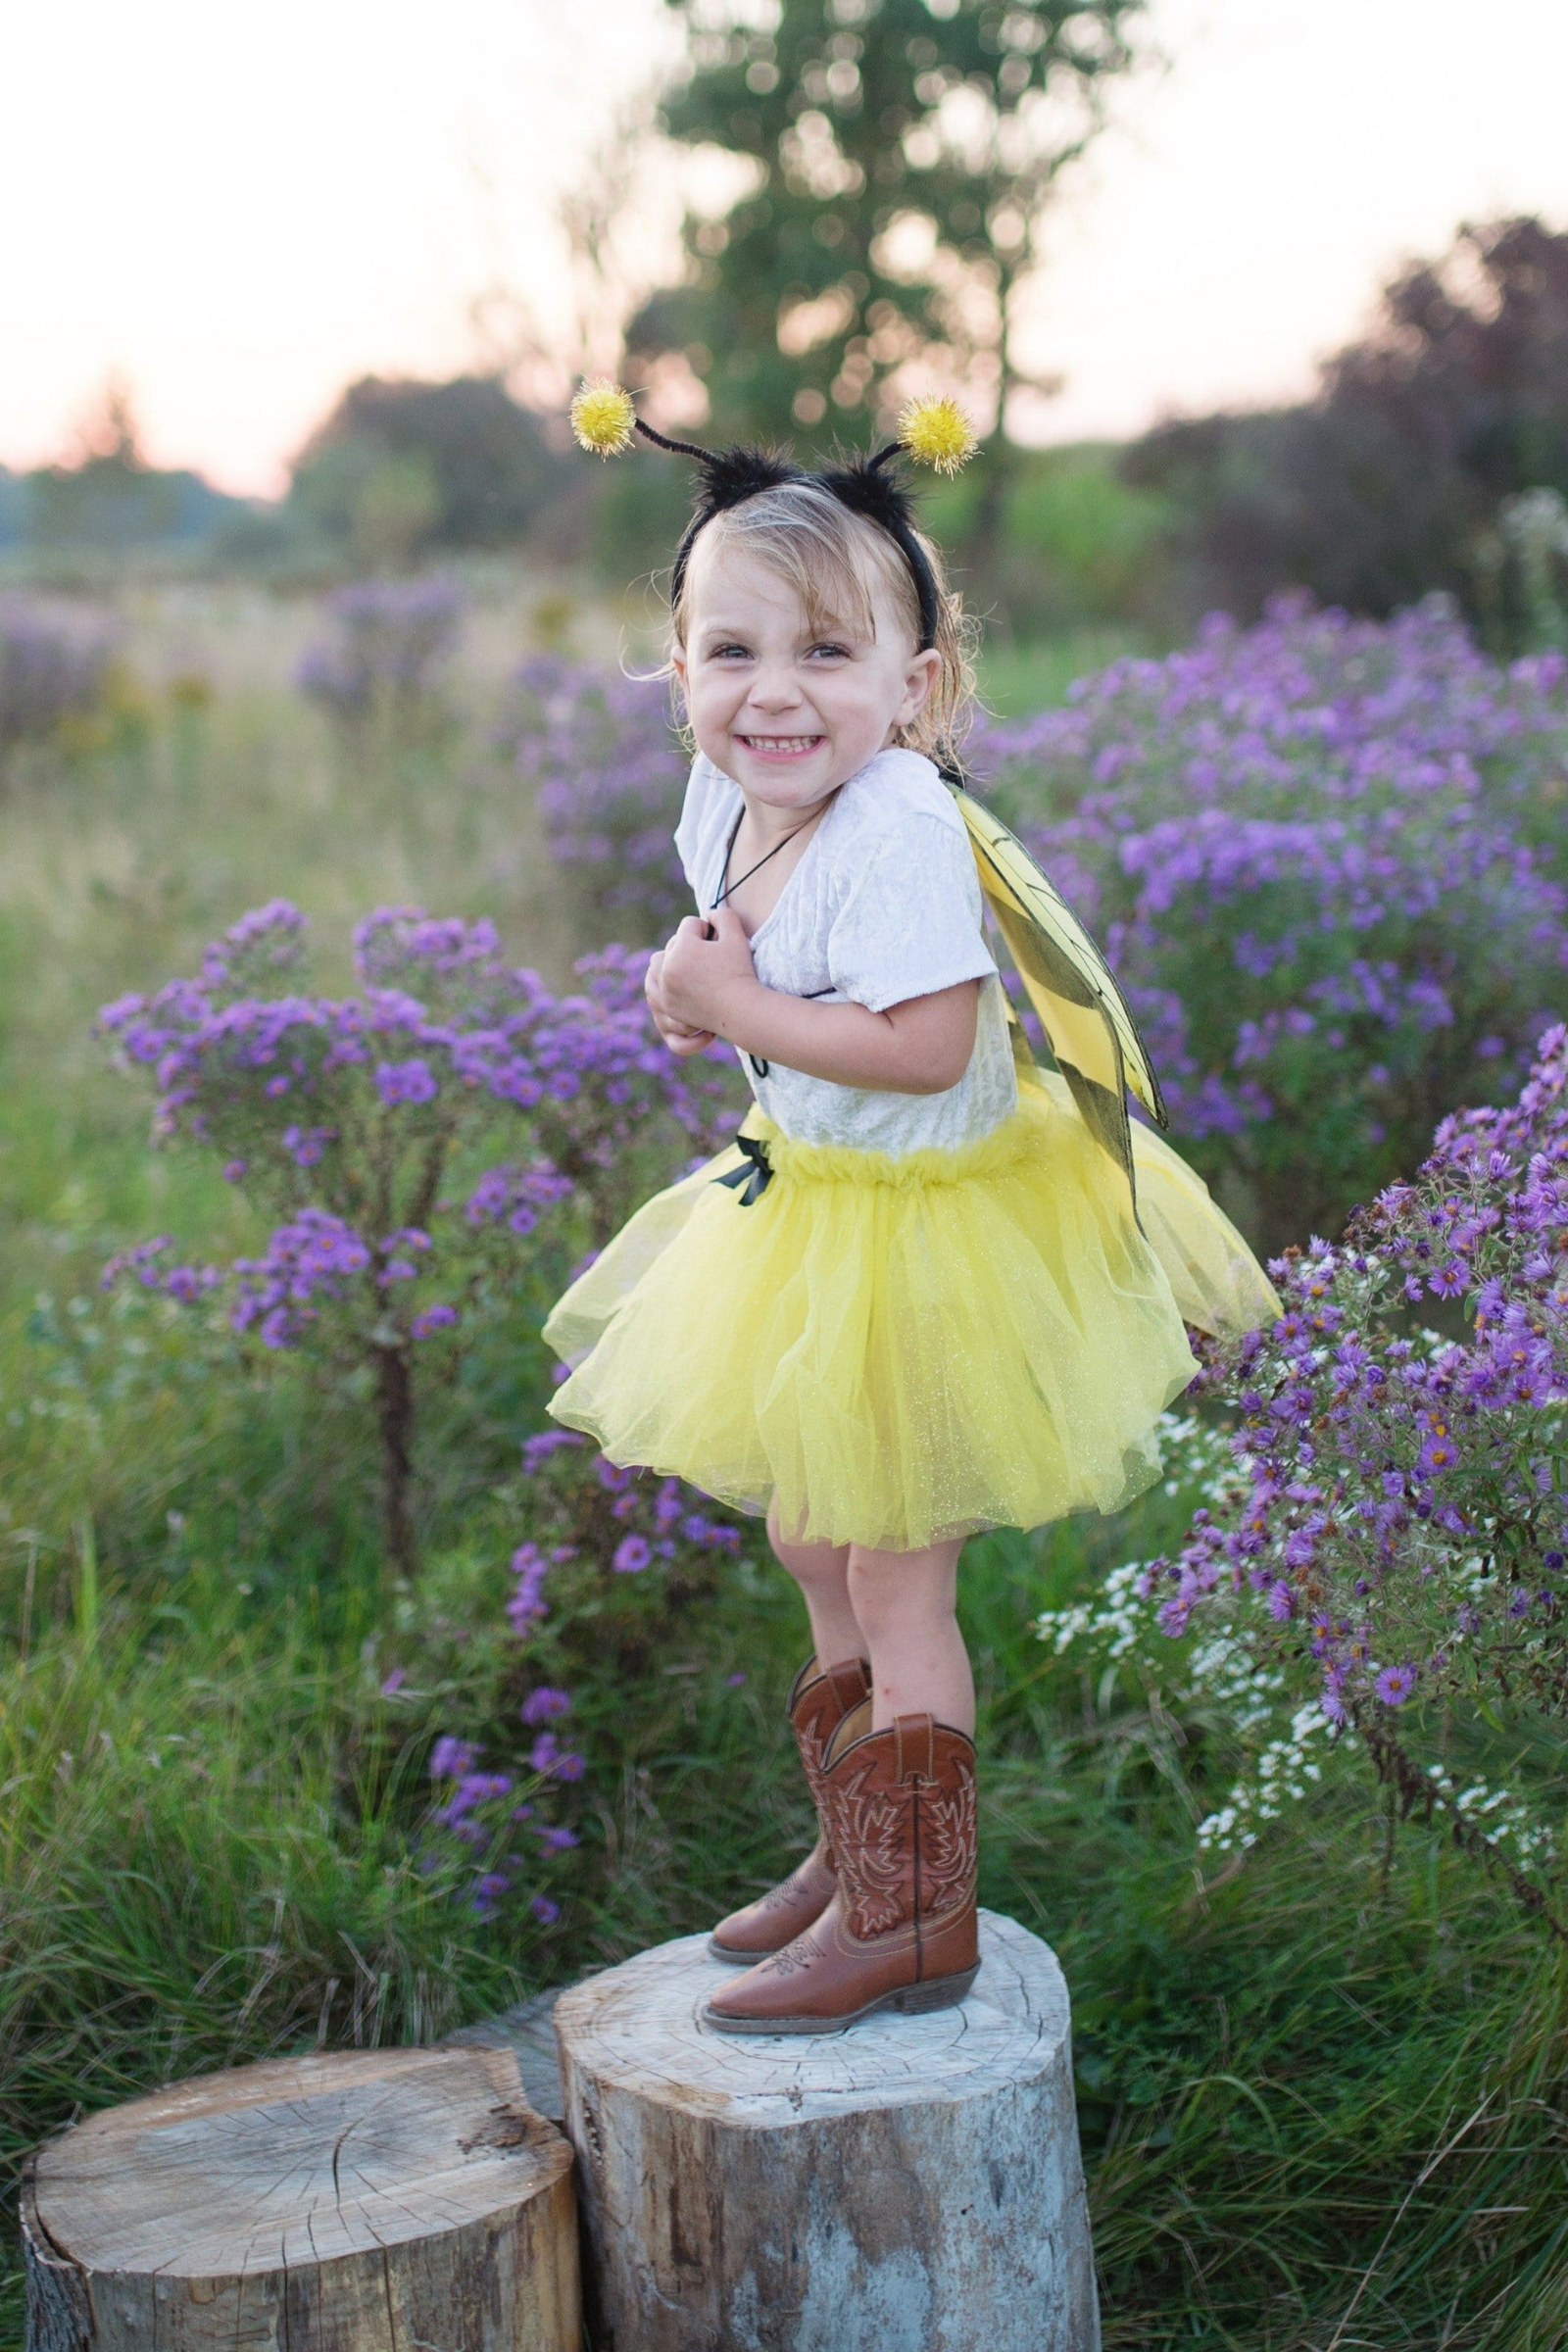 Dress Up Fun! Get the Glitter Bumblebee Set Sizes 4-6 for Your Kids Now! -  Bellaboo